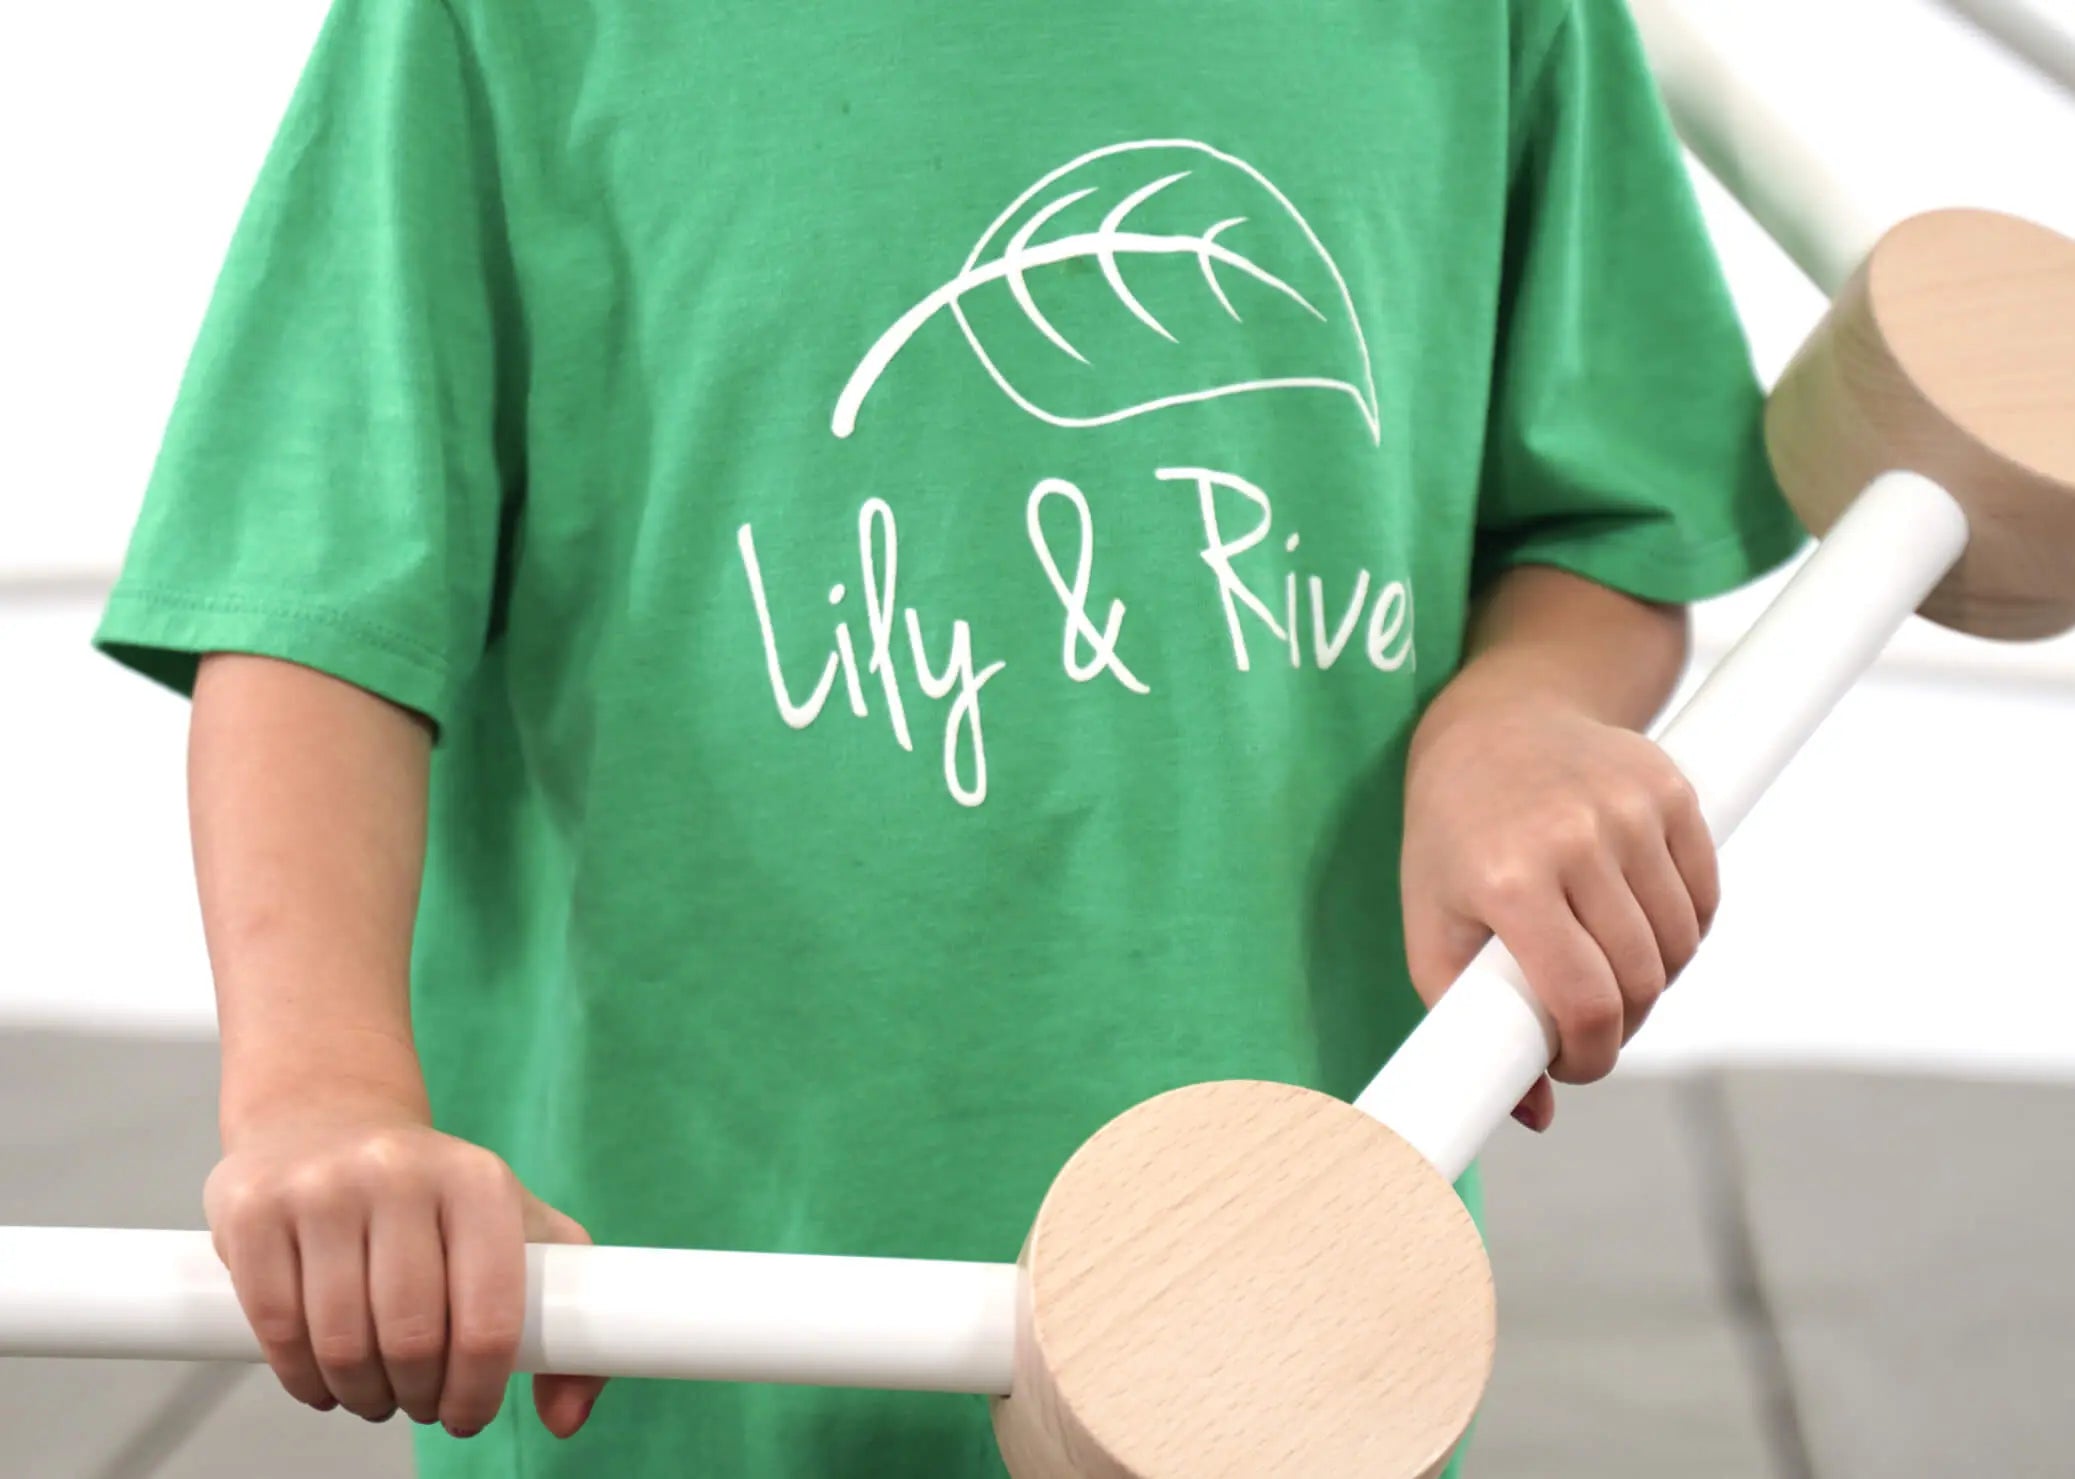 Lily & River Little Dome Monkey Bars & Wall Bars